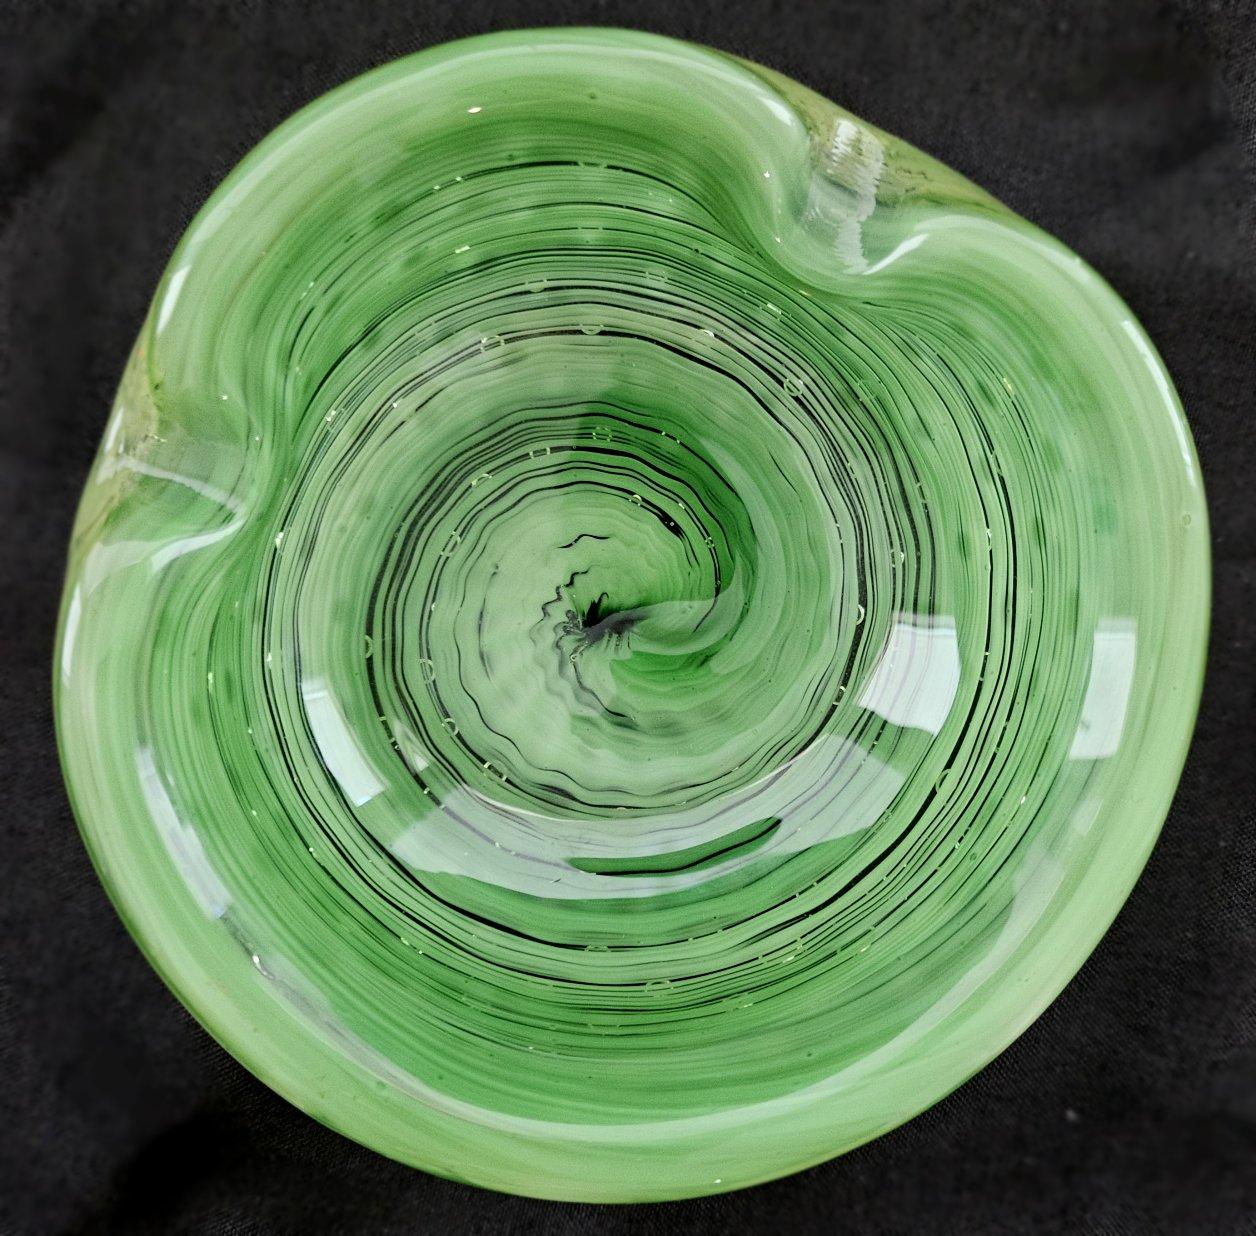 Vintage Murano Glass Ashtray, Optic Swirl & Bullicante (controlled bubbles)
Excellent vintage condition. No chips or cracks.
Measures about 5 x 2 inches.


Measurements are approximate and may vary throughout the piece. Please be aware that the